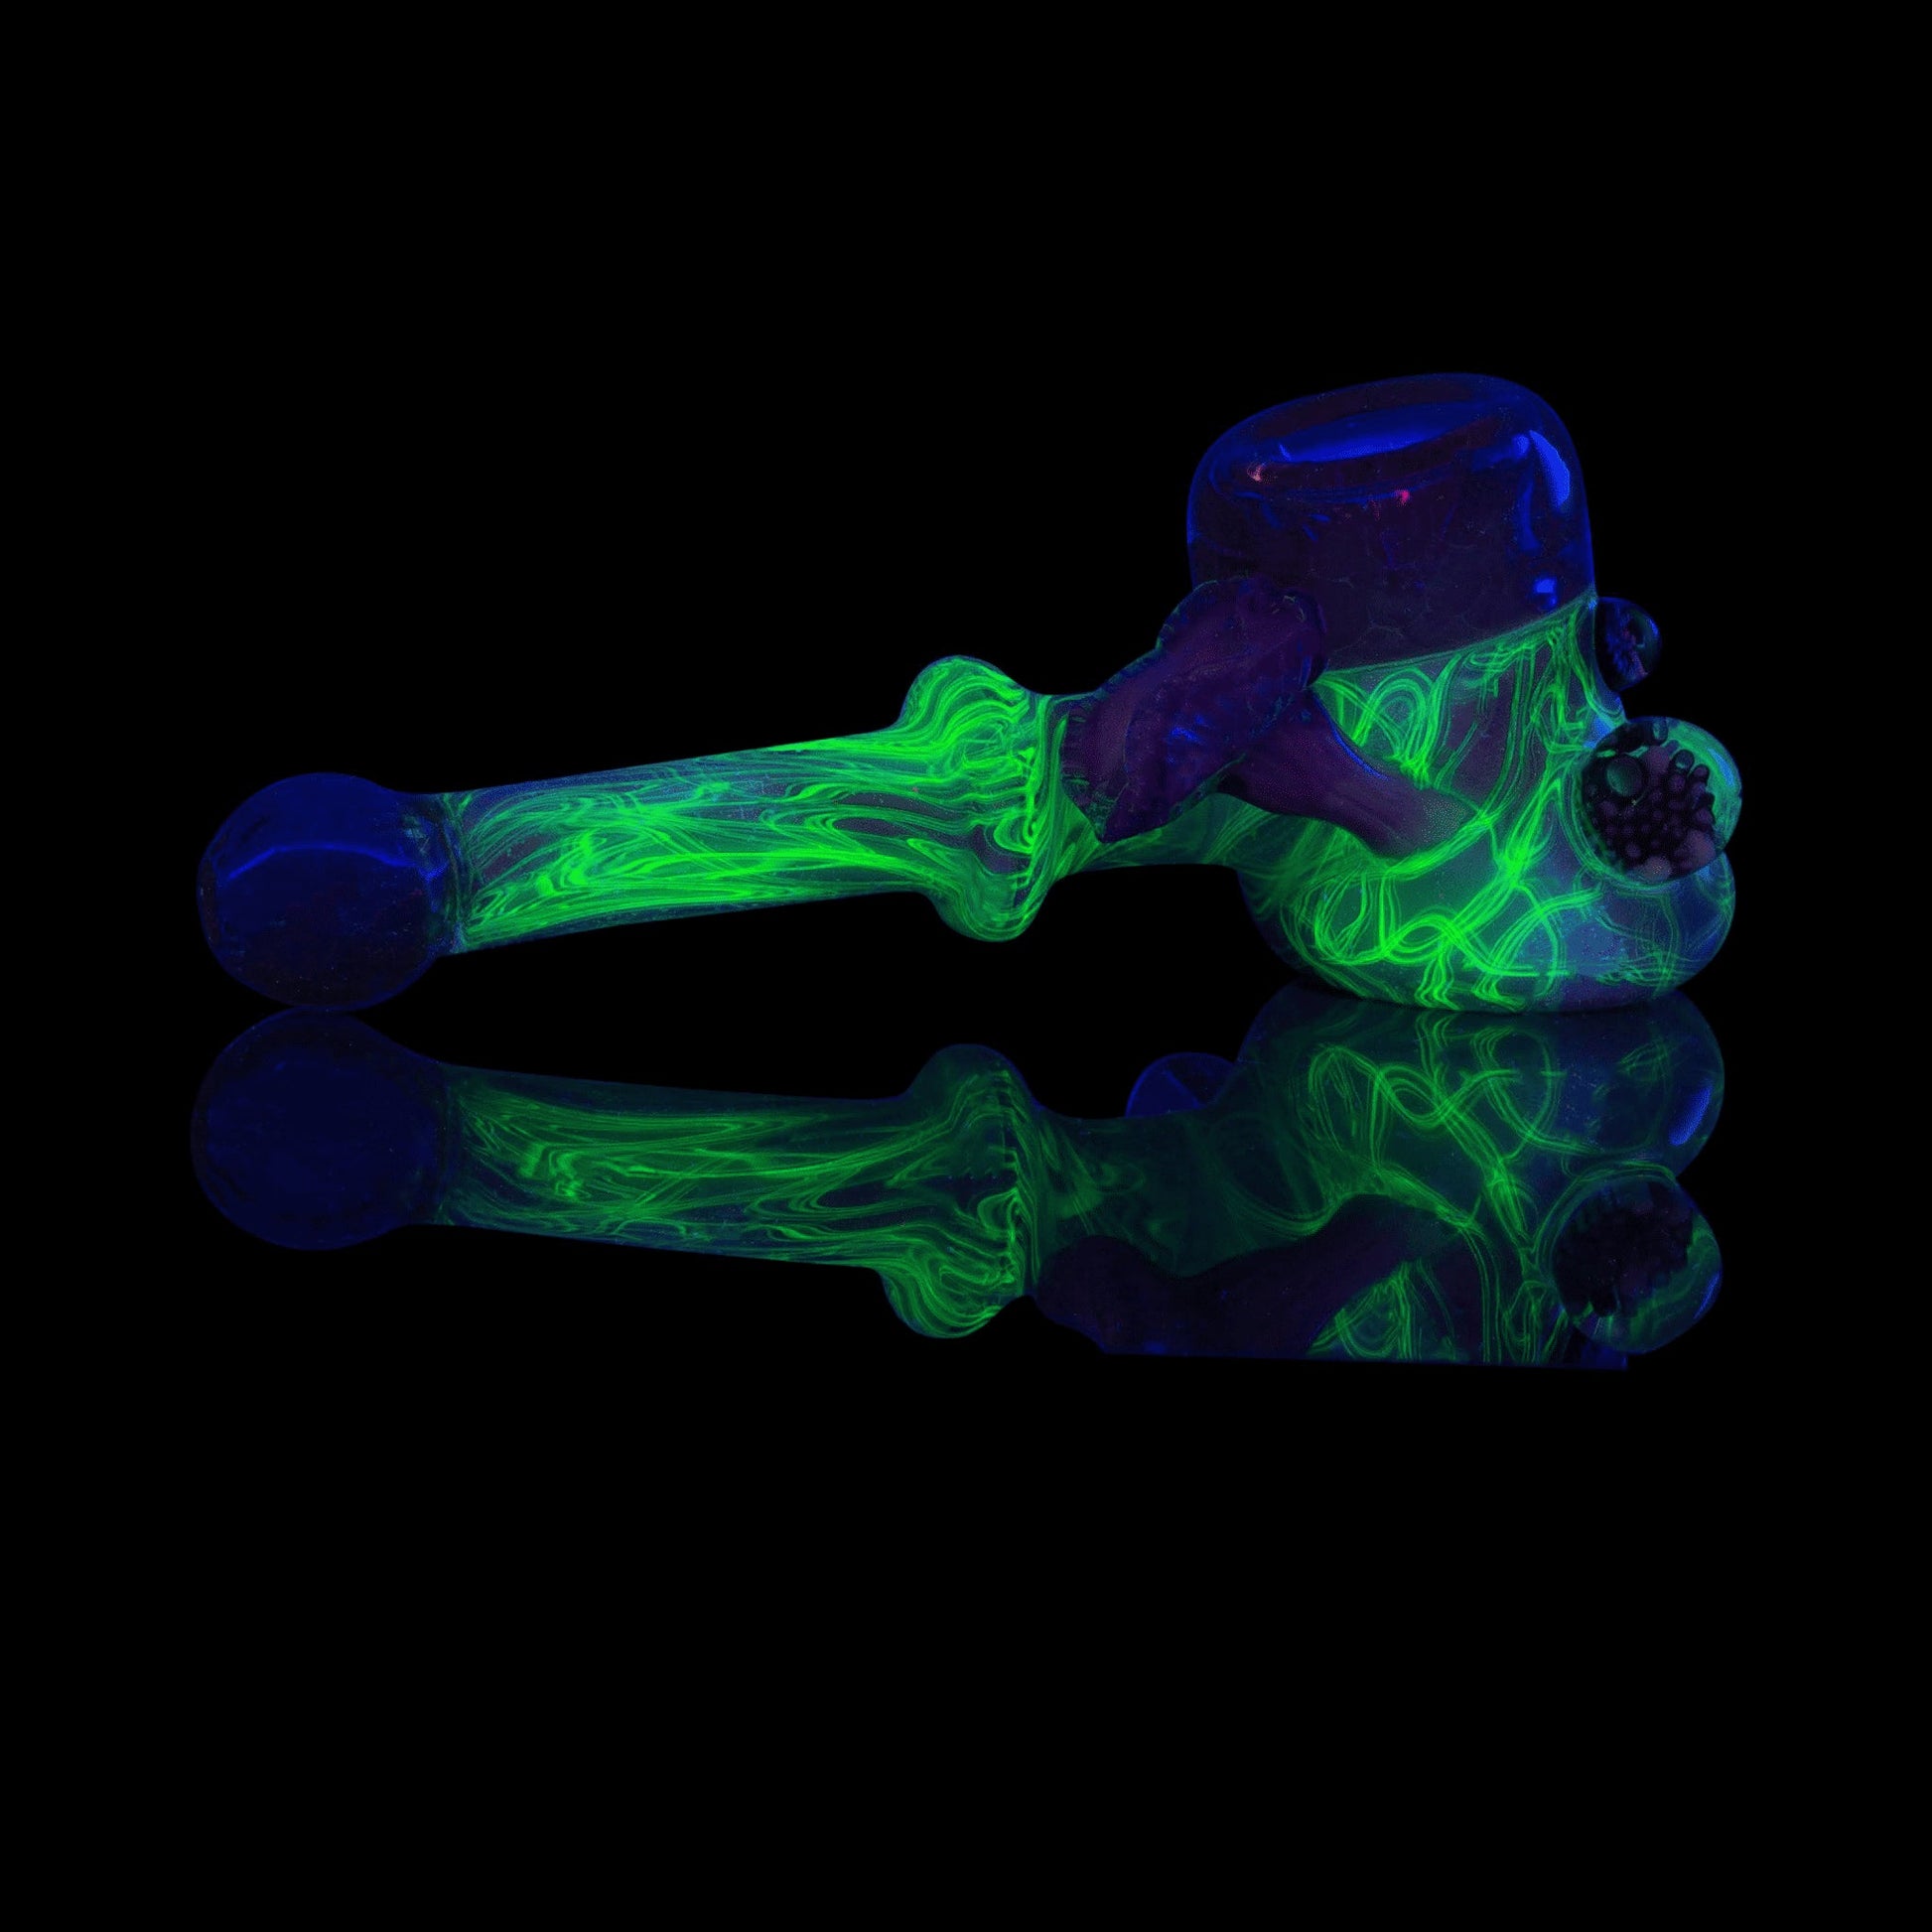 hand-blown design of the Collab Pipe by  Ryce Made This x  Scomo Moanet (Scribble Season 2022)